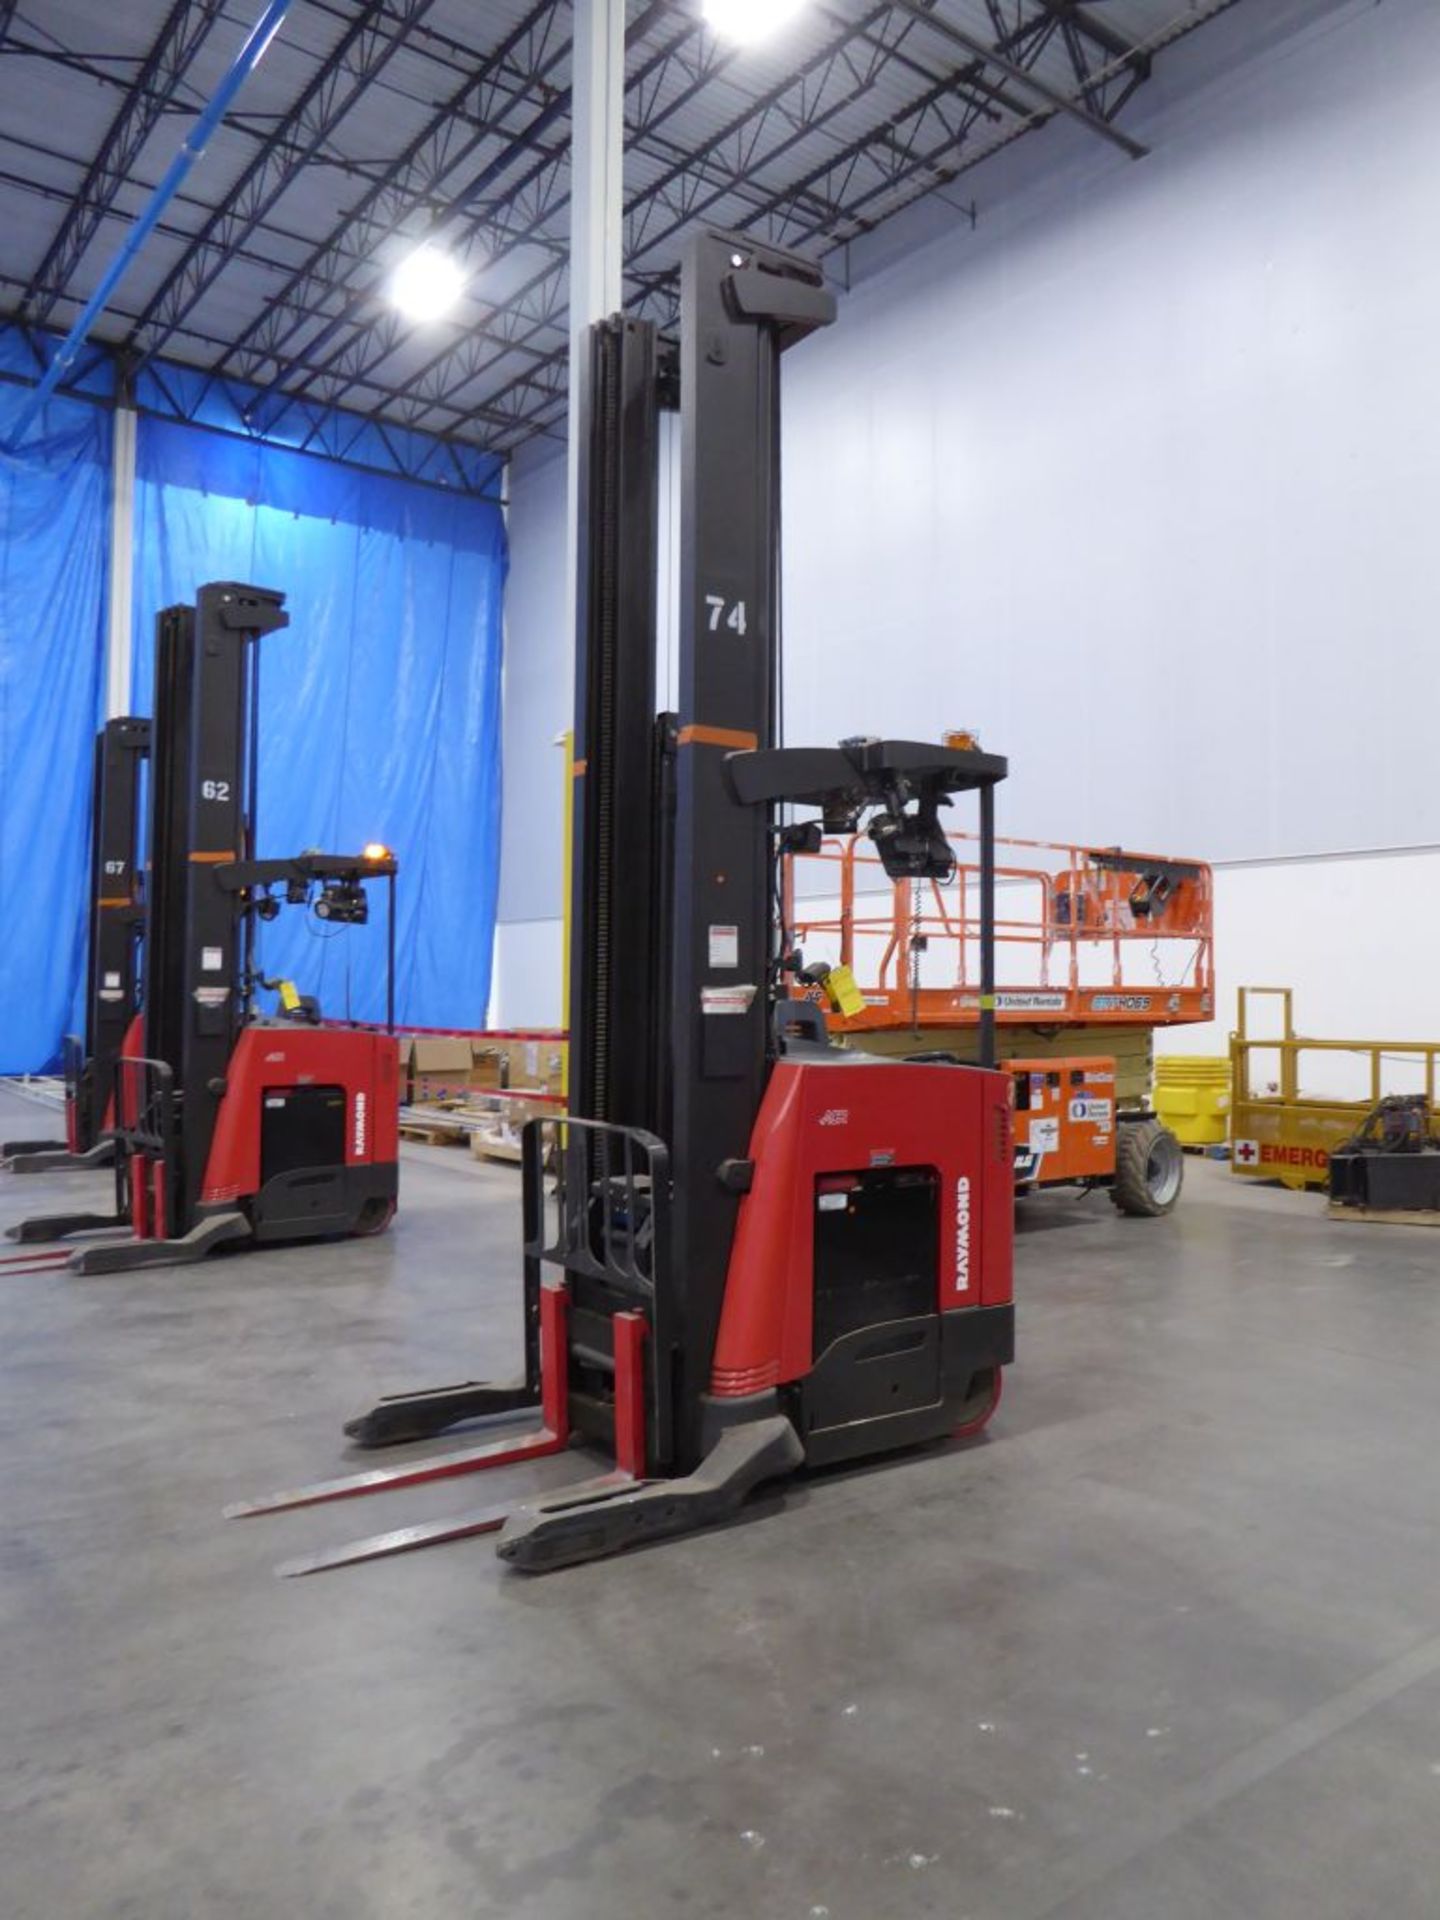 Raymond 7500 Universal Stance Reach Forklift - Image 3 of 9